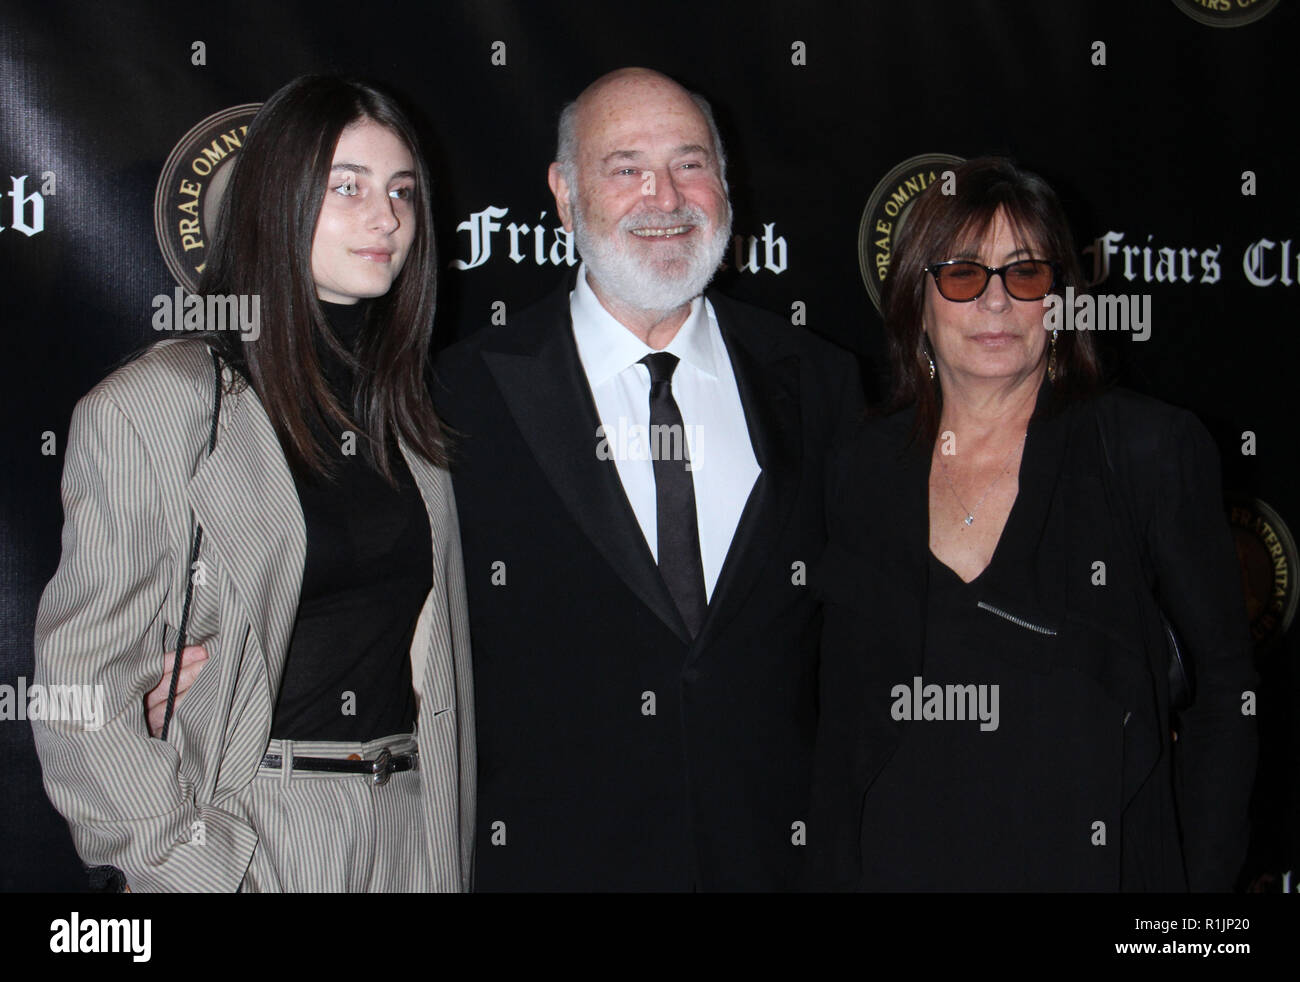 New York, NY, USA. 12th Nov, 2018. Tracy Reiner, Rob Reiner, Michele Singer at The Friars Club event honoring Billy Crystal with the Entertainment Icon Award at the Ziegfeld Ballroom in New York City on November 12, 2018. Credit: Rw/Media Punch/Alamy Live News Stock Photo